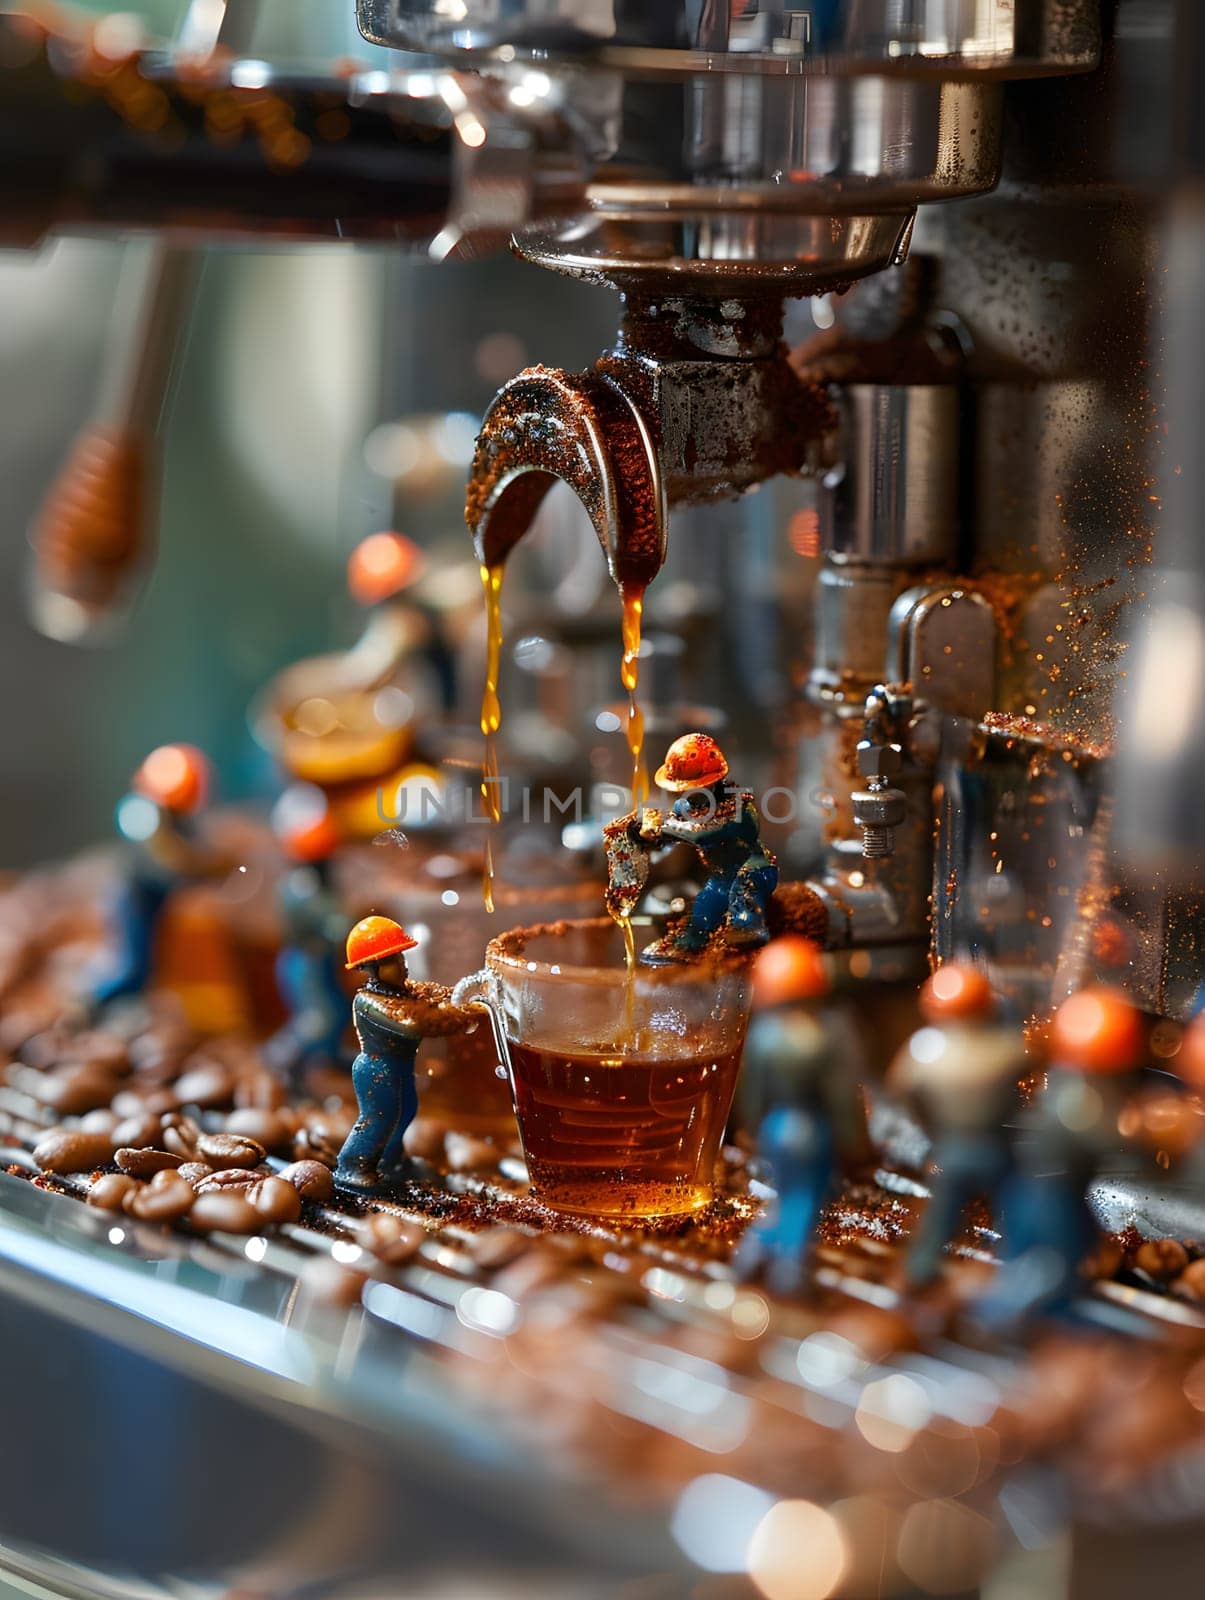 A liquid coffee is being poured from a coffee machine in a city market, surrounded by construction workers. The drinkware is made of glass and metal